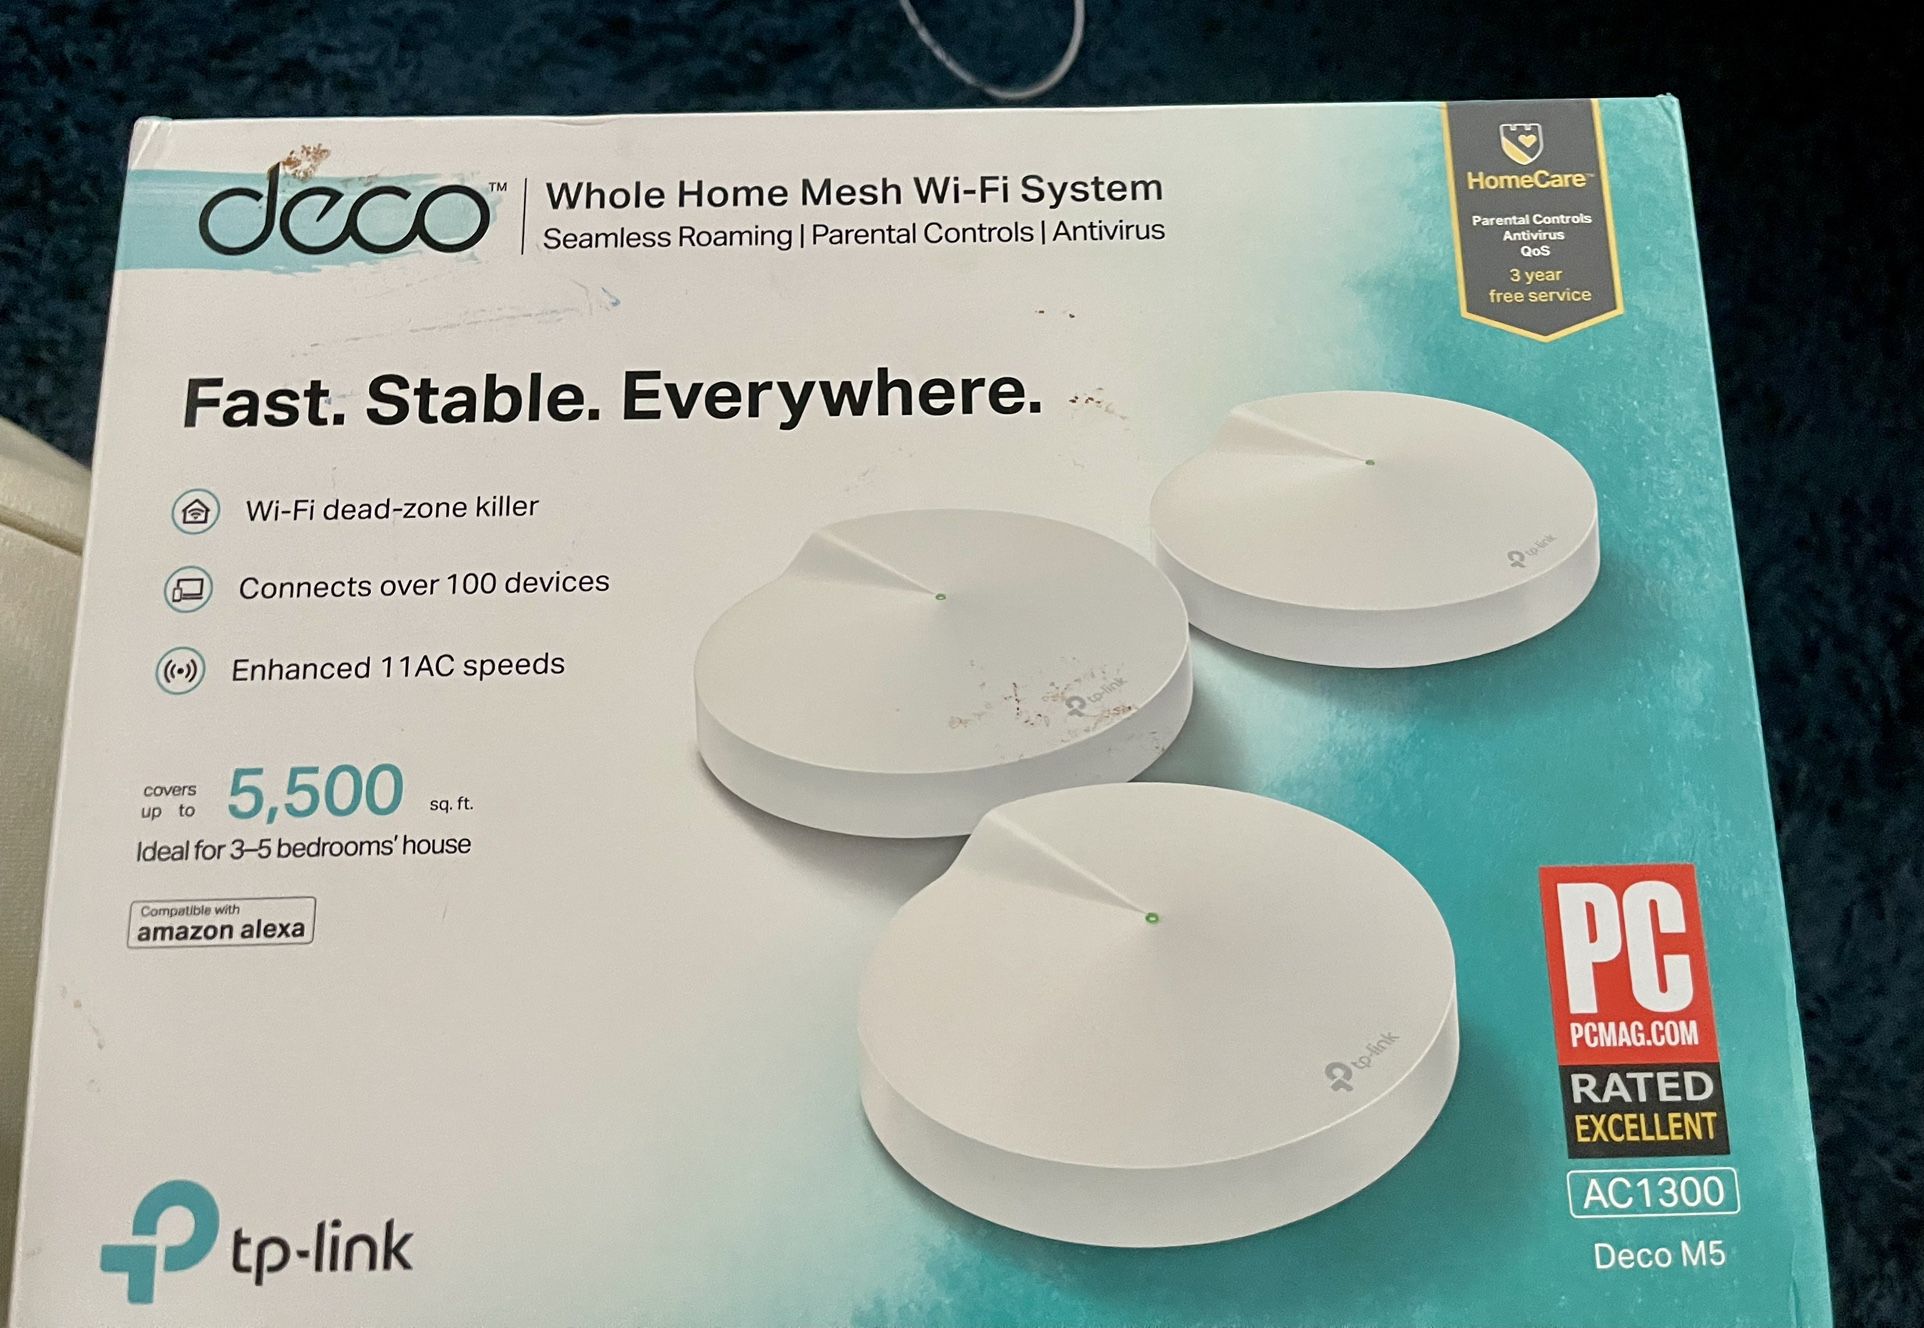 NEW TP-Link Deco Mesh WiFi System(Deco M5)Up 5,500 sq. ft. Whole Home Coverage and 100+ Devices,WiFi Router/Extender Replacement, Anitivirus, 3-pack 